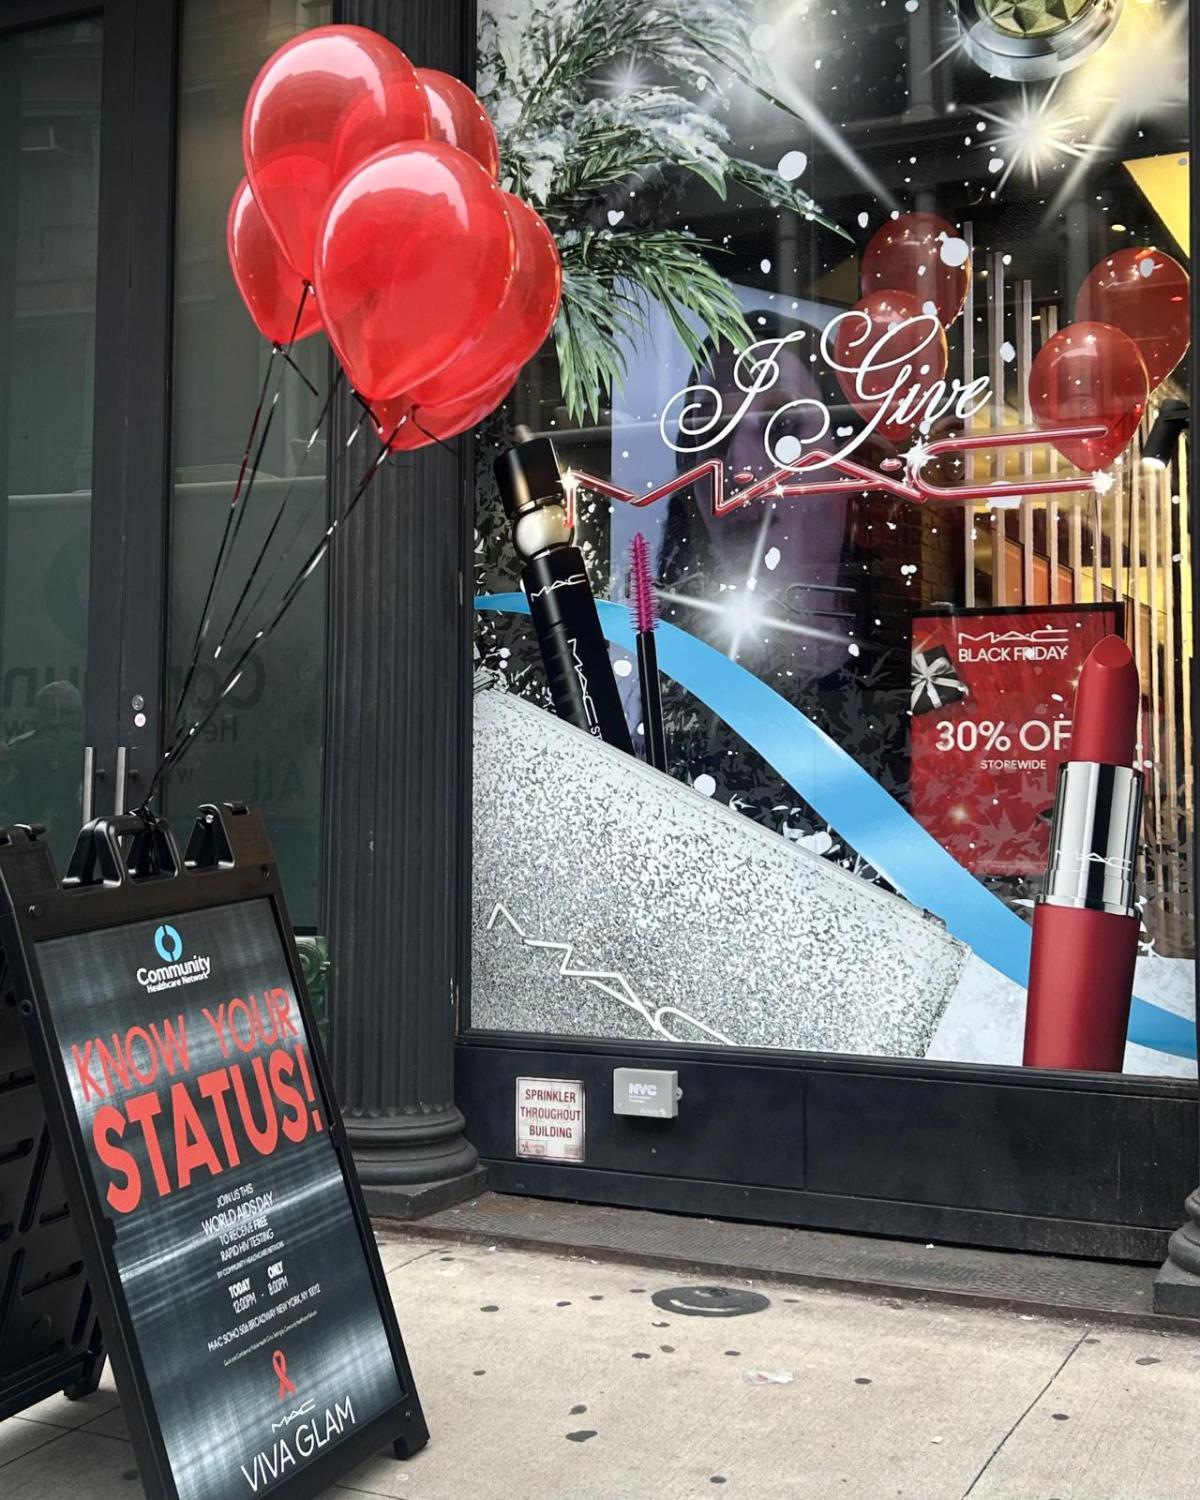 MAC store front with a "Know your status" board with red balloons in front.